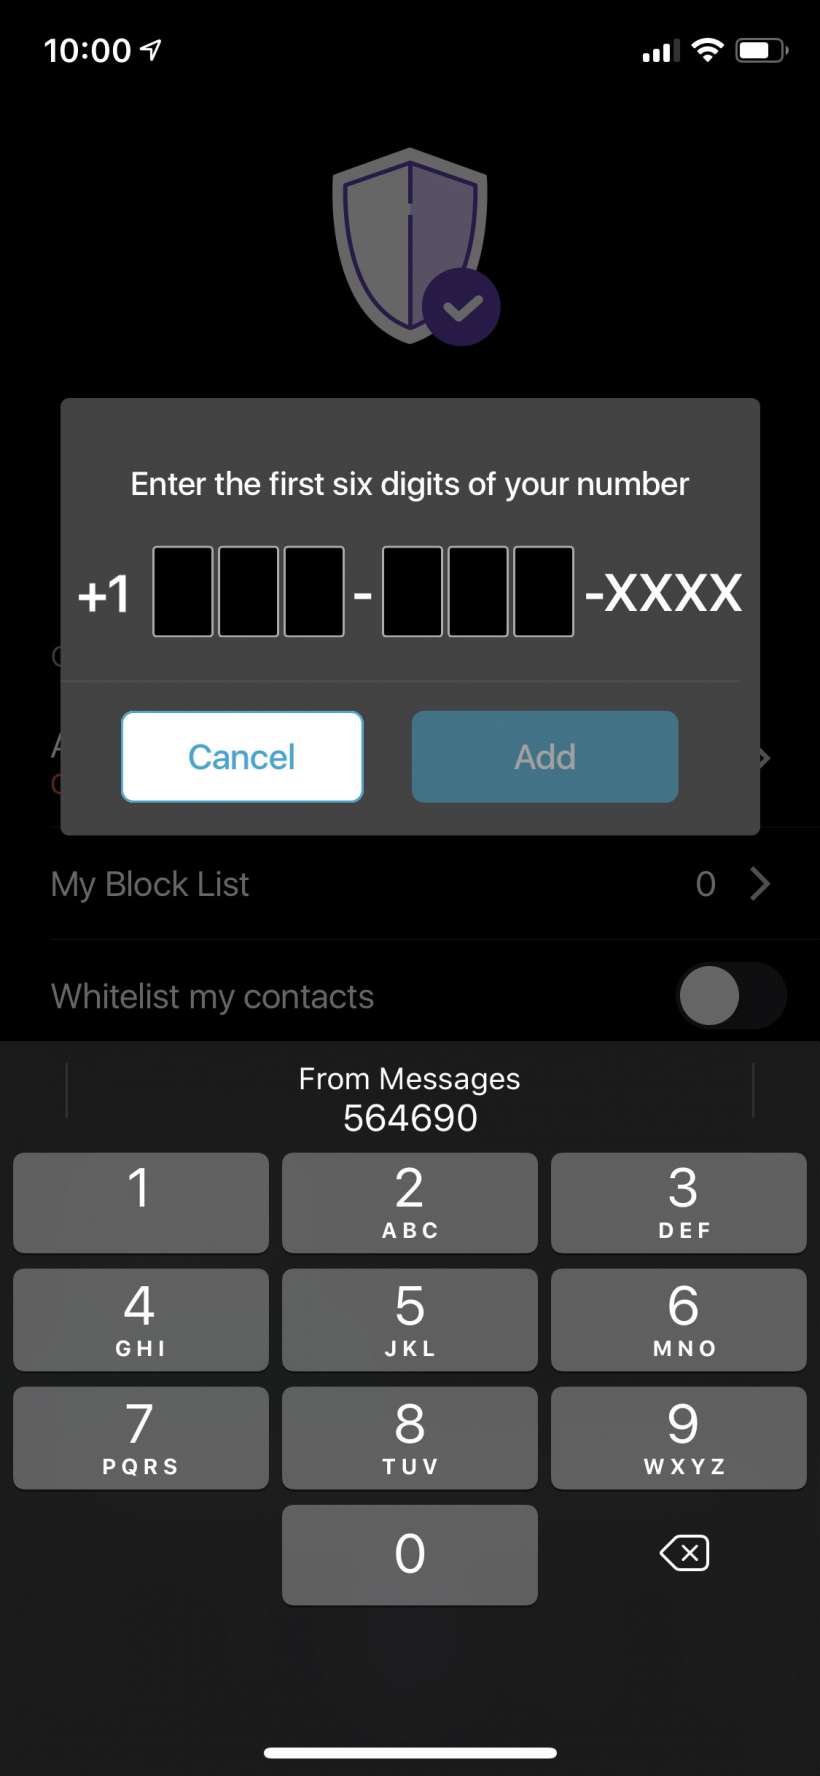 How to block calls from your area code on iPhone.